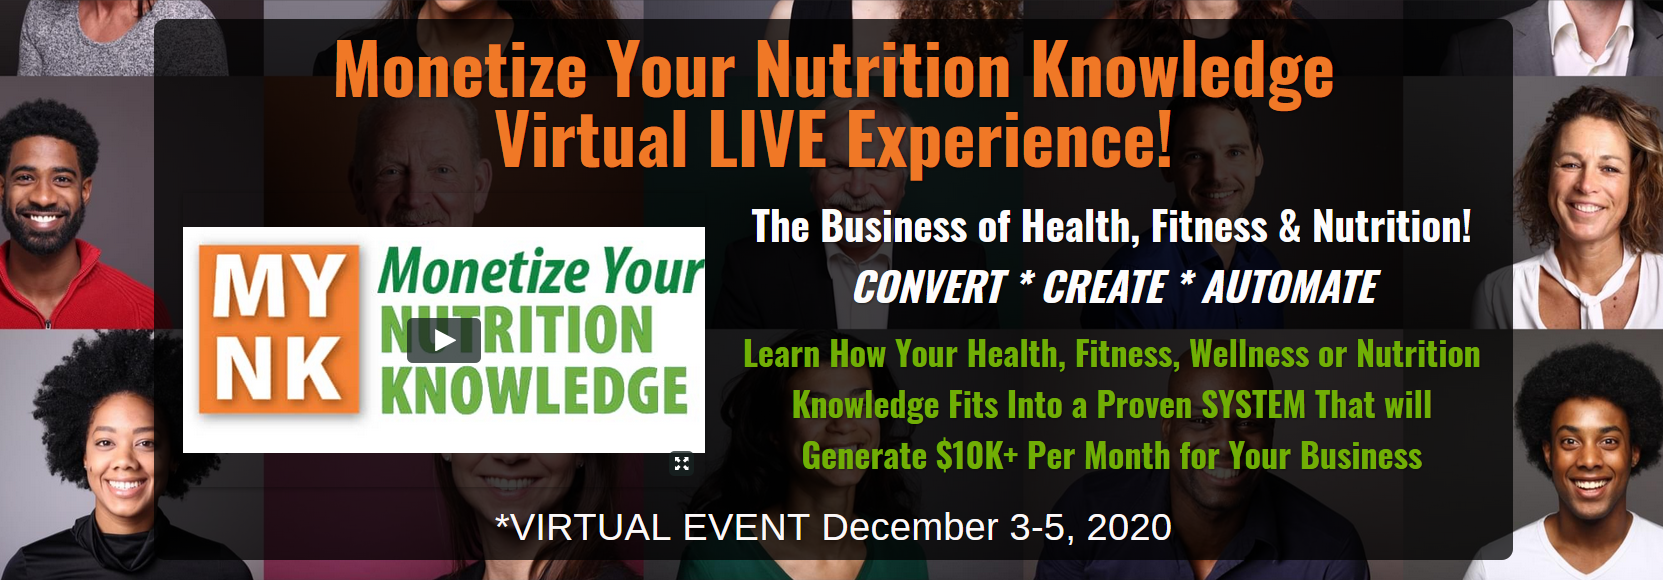 Monetize Your Nutrition Knowledge Virtual Live Experience for Health, Fitness, Wellness & Nutrition Professionals, Coaches and Business Owners